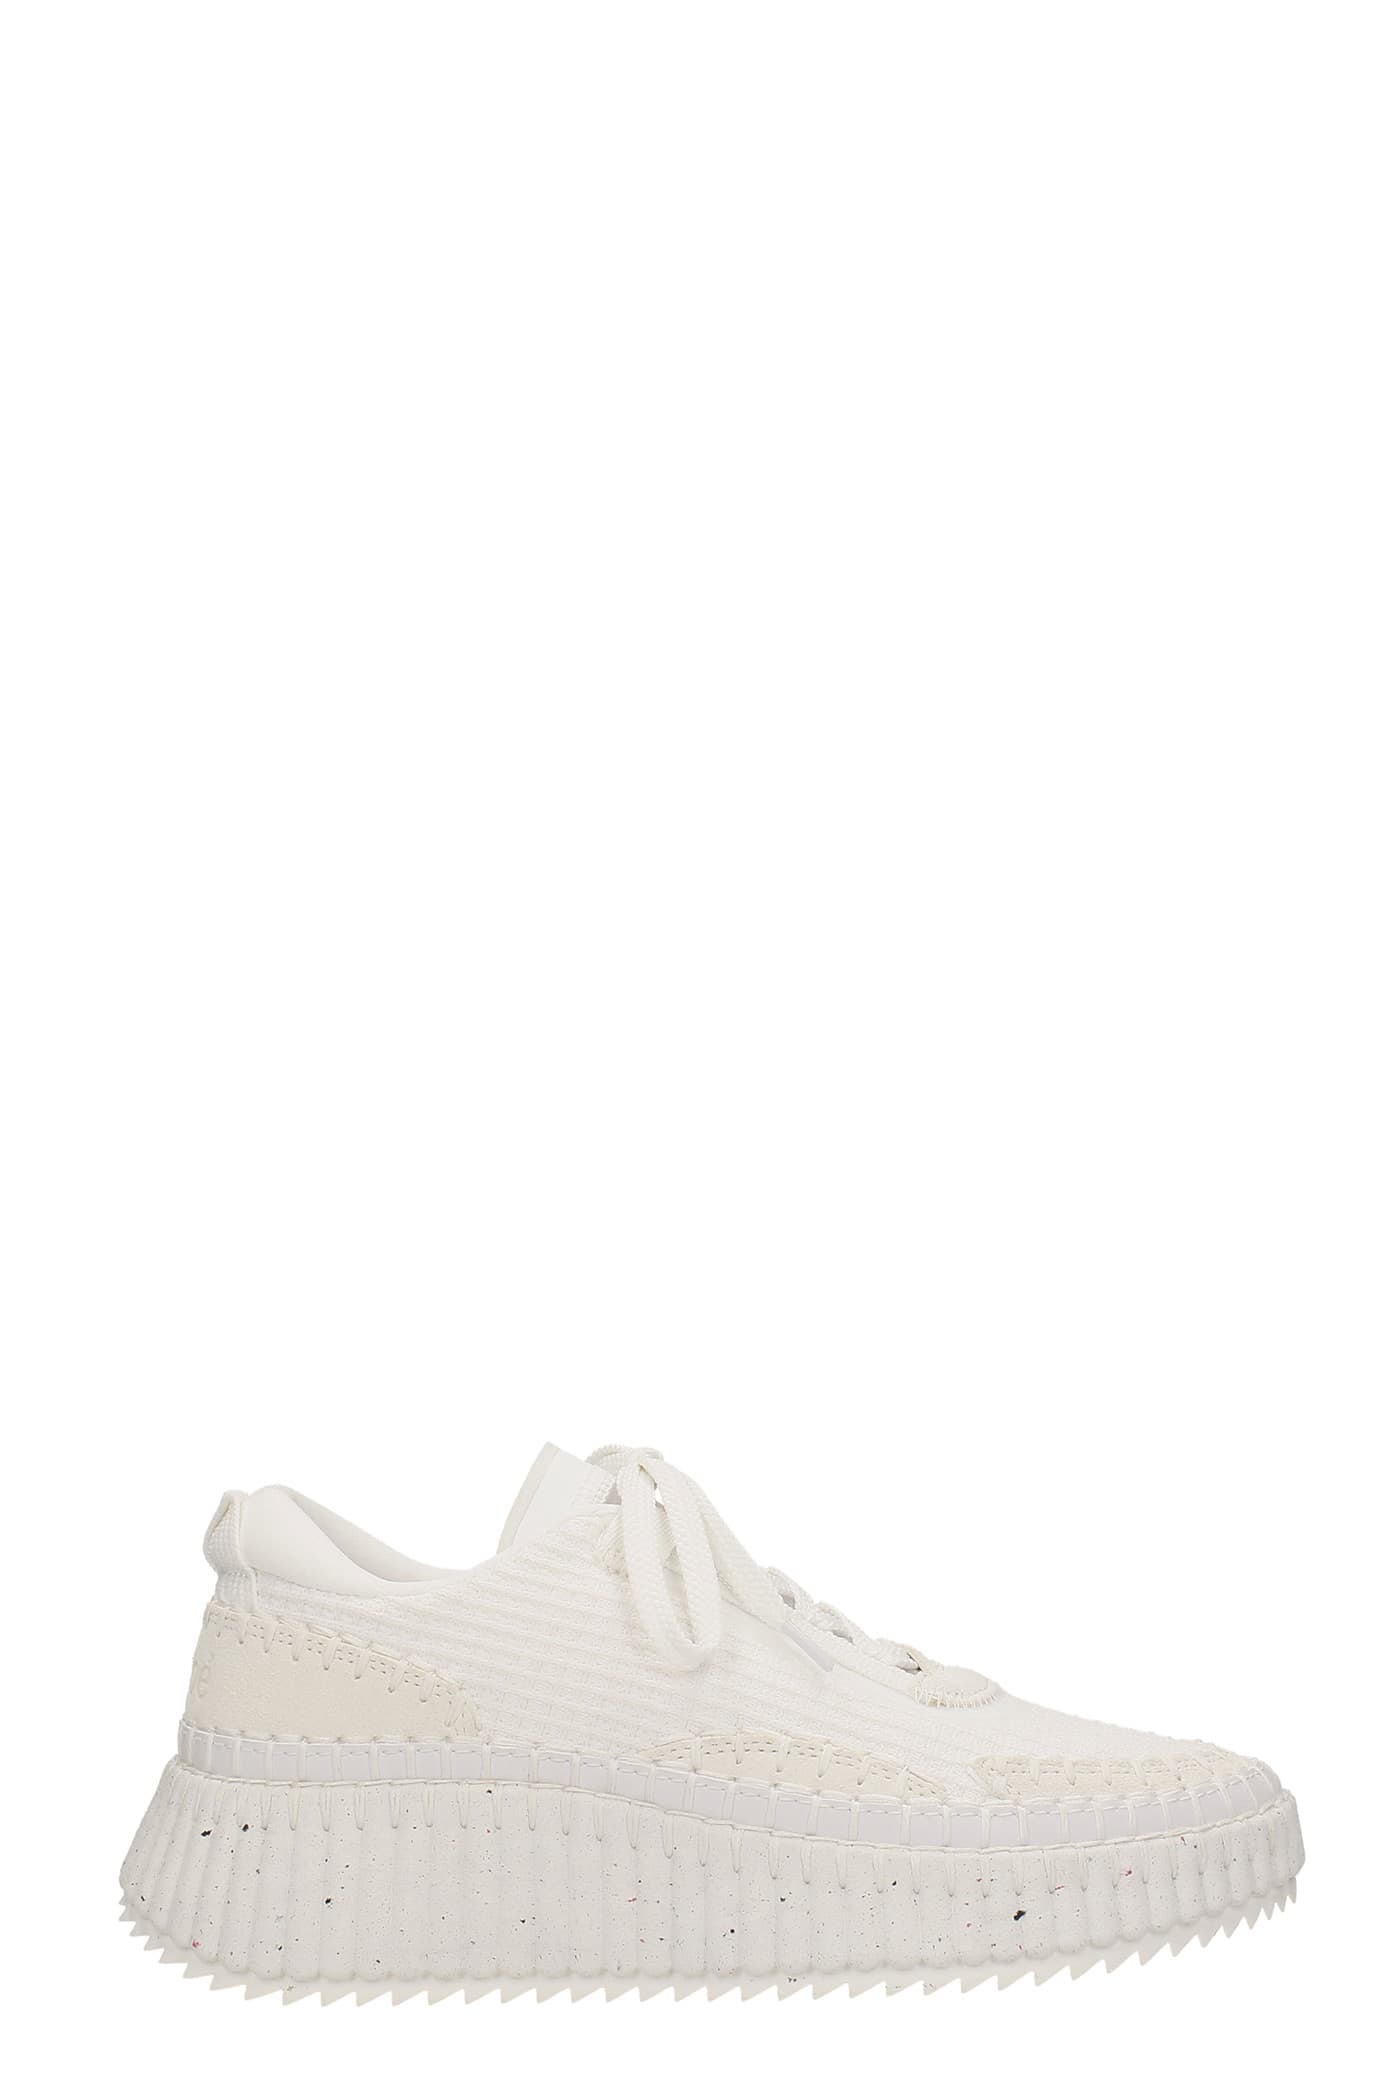 Chloé Nama Sneakers In White Leather And Fabric